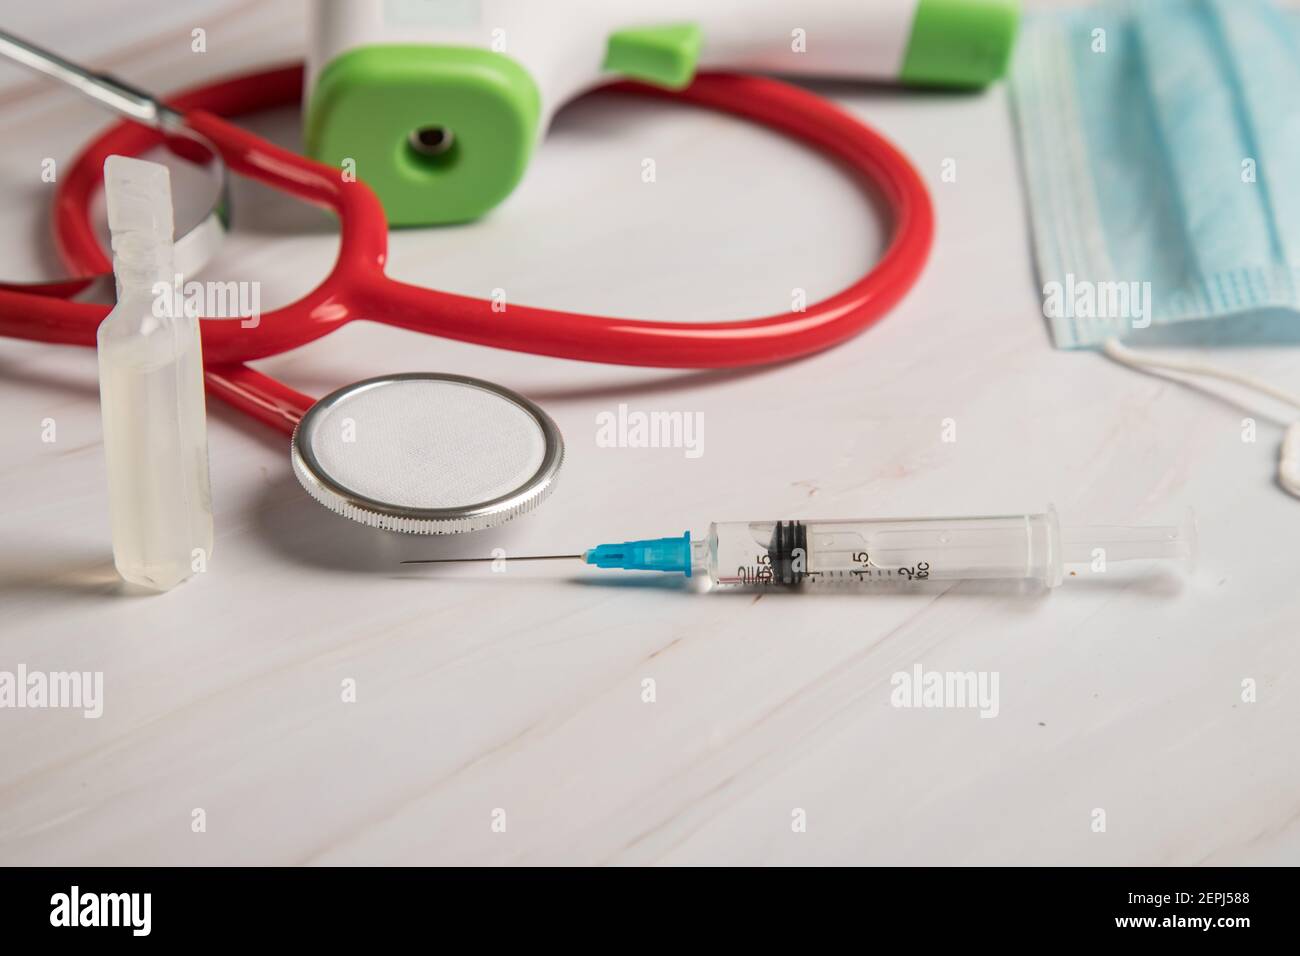 The doctor's equipment consists of a syringe with a coronavirus vaccine, an infrared thermometer, a stethoscope and a medical mask. Stock Photo